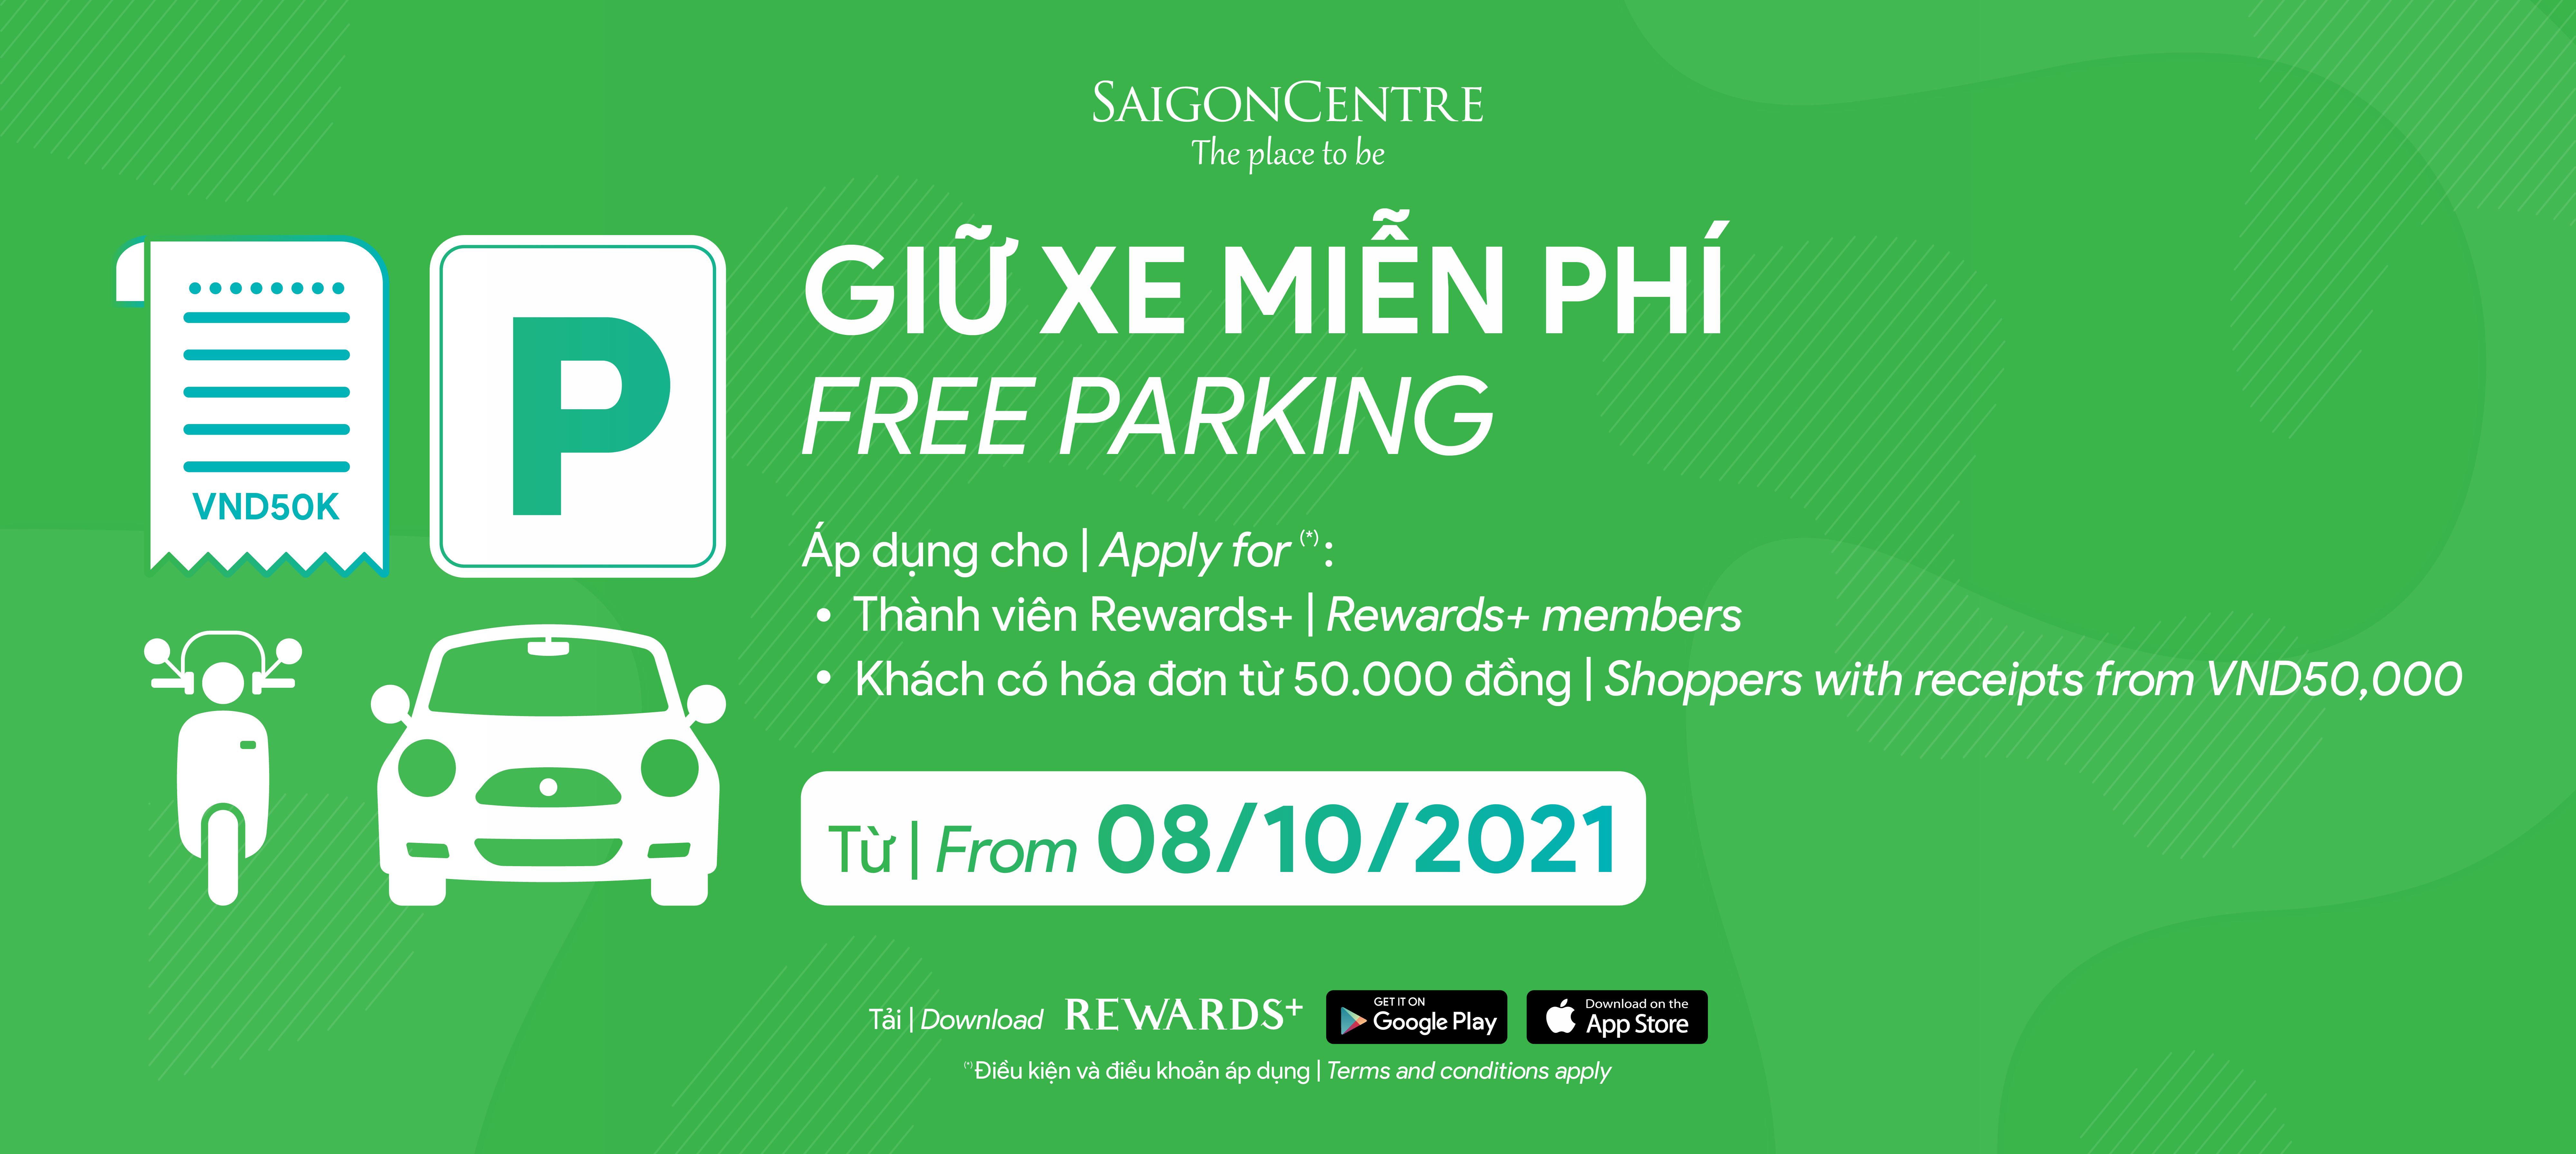 FREE PARKING FOR REWARDS+ MEMBERS OR VND50K RECEIPTS